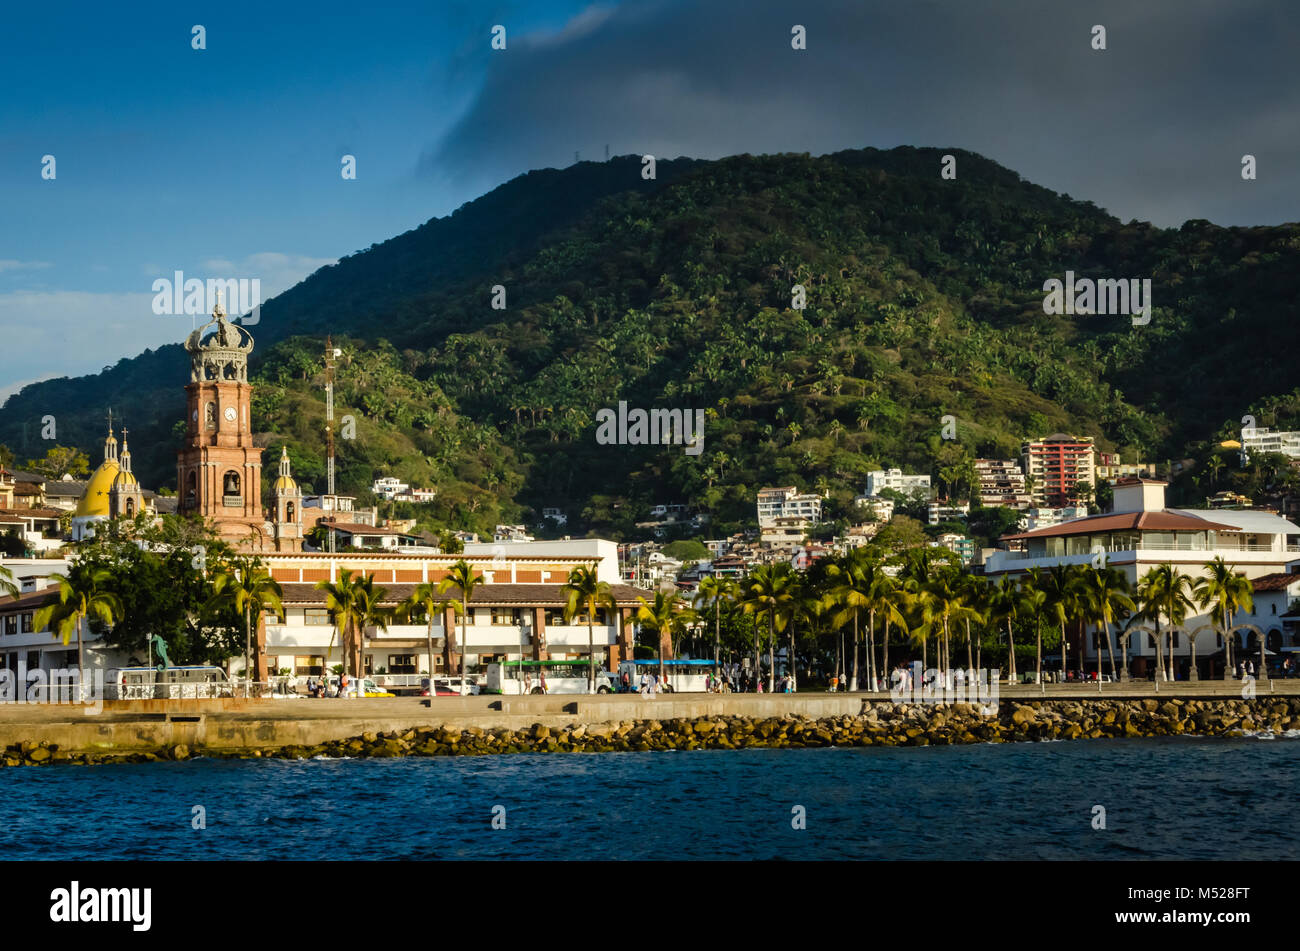 Shoreline view of Puerto Vallarta, Jalisca, Mexico includes Malecon, shops, and cathedral. Stock Photo